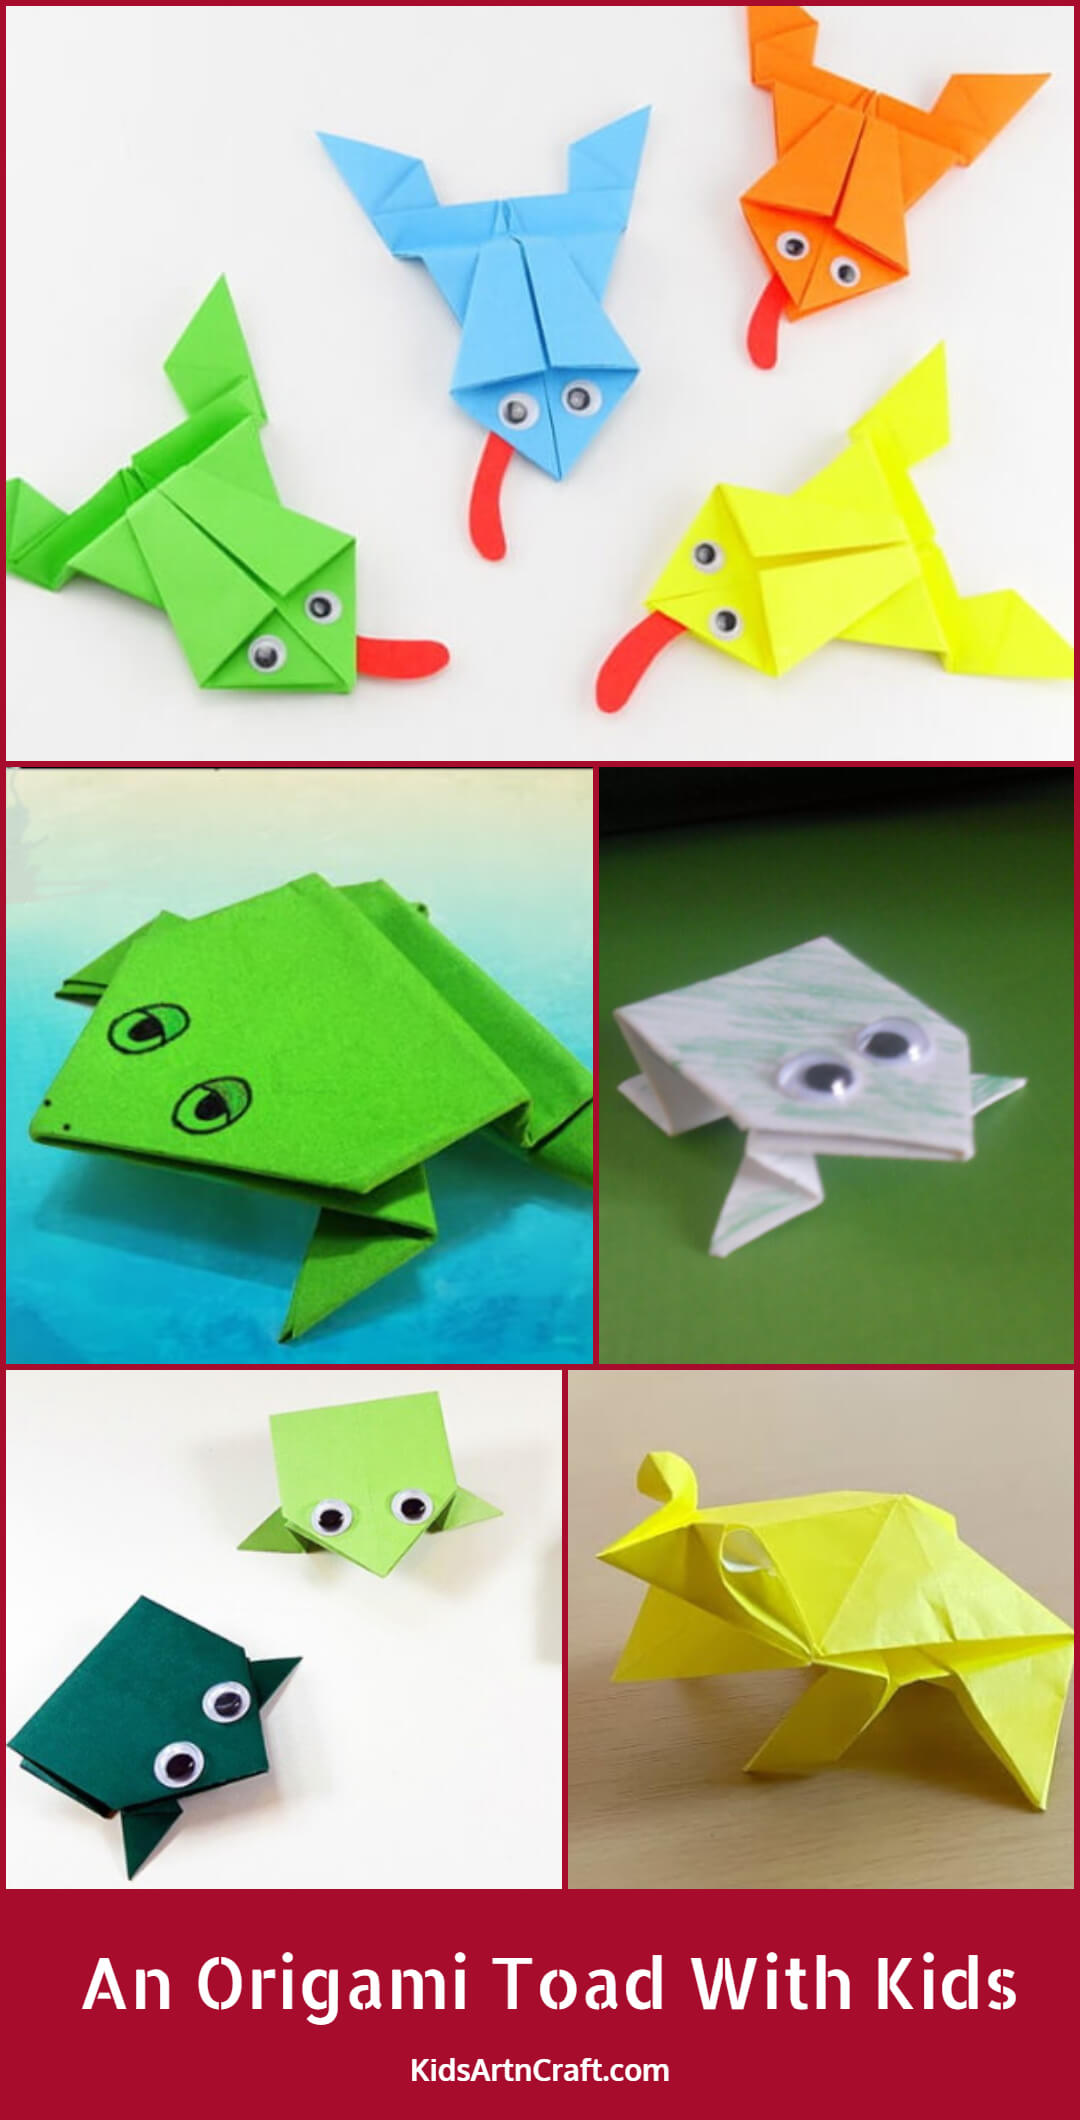 How To Make An Origami Toad With Kids